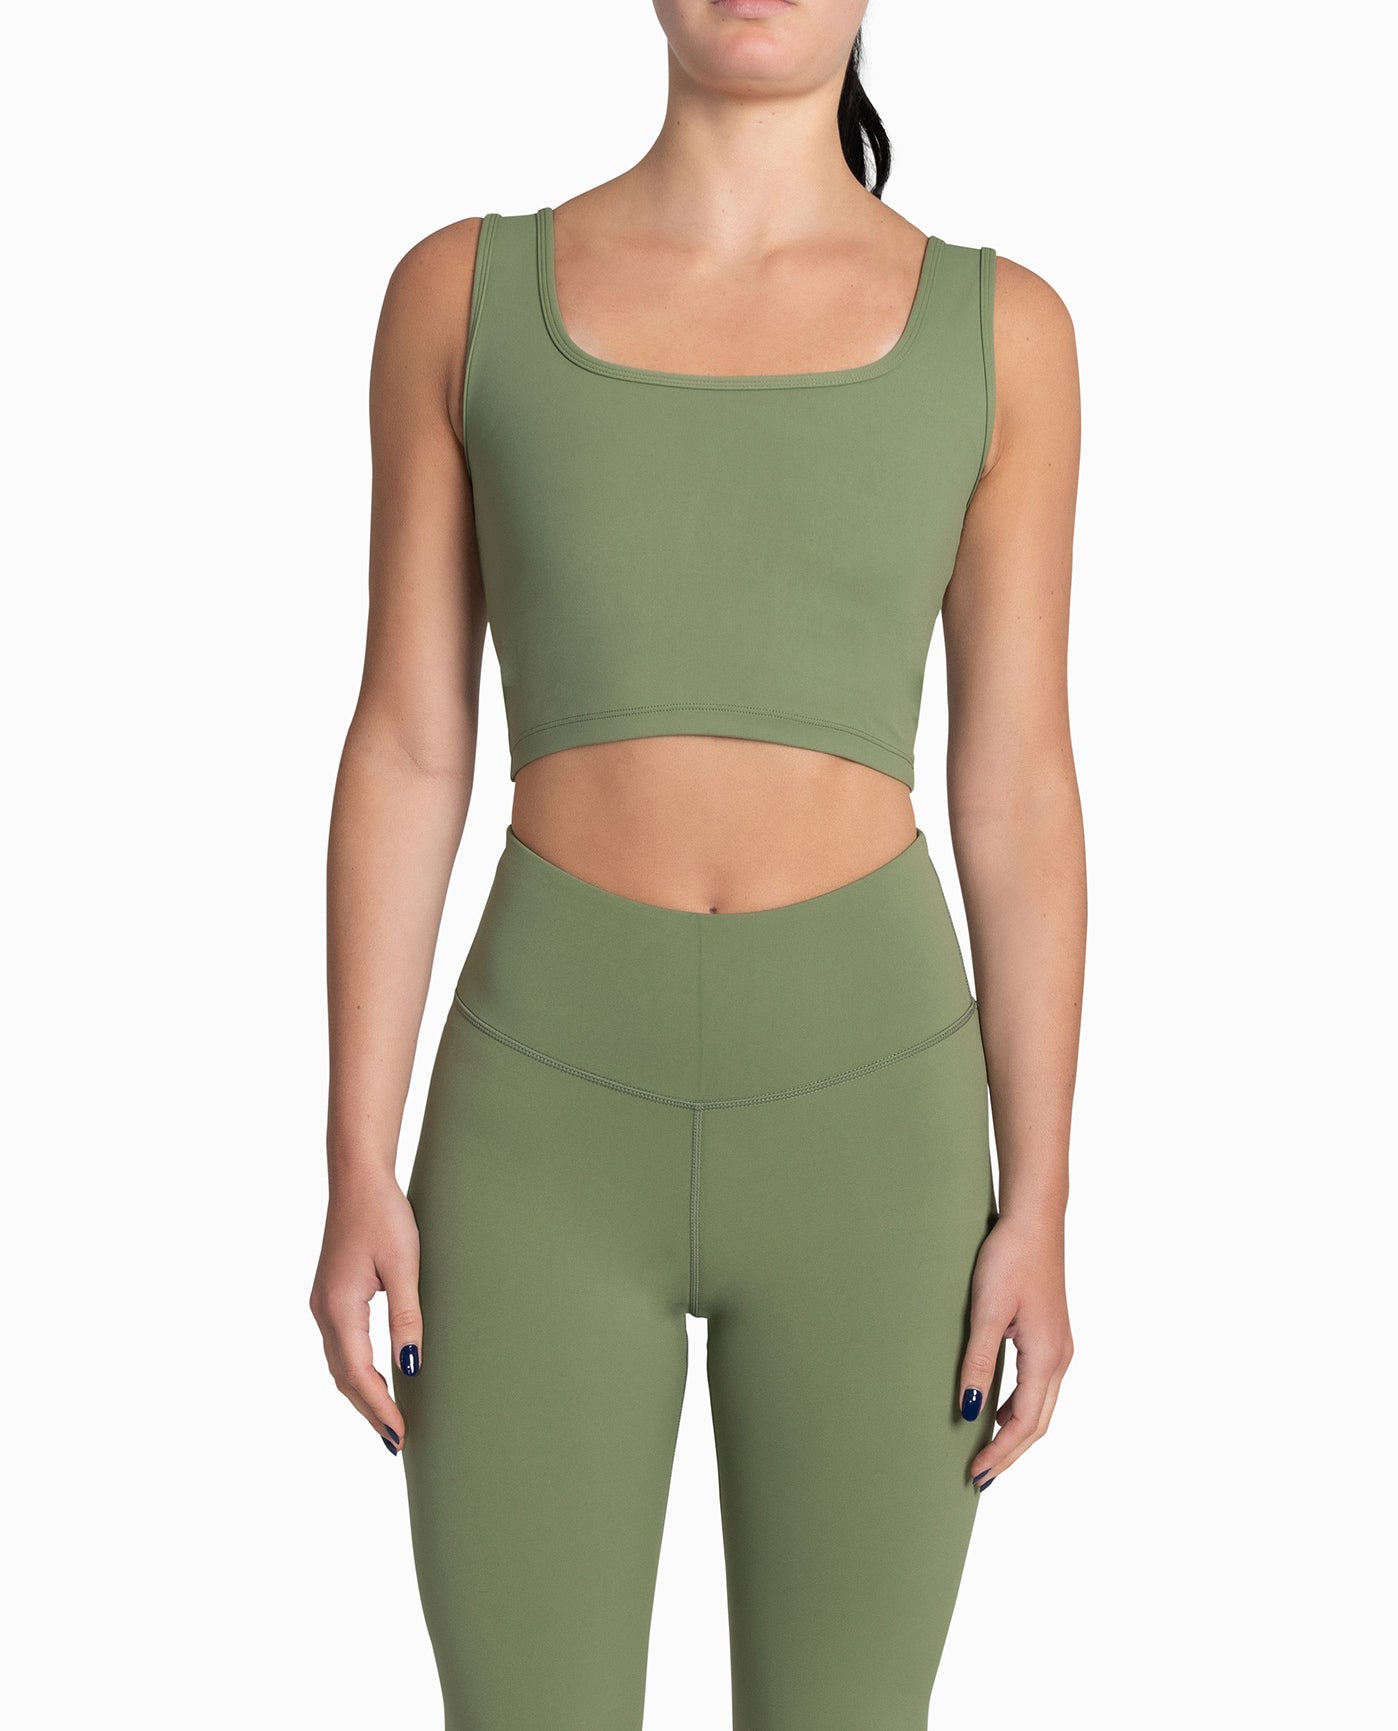 FRONT OF SPORTS BRA TOP | Olive